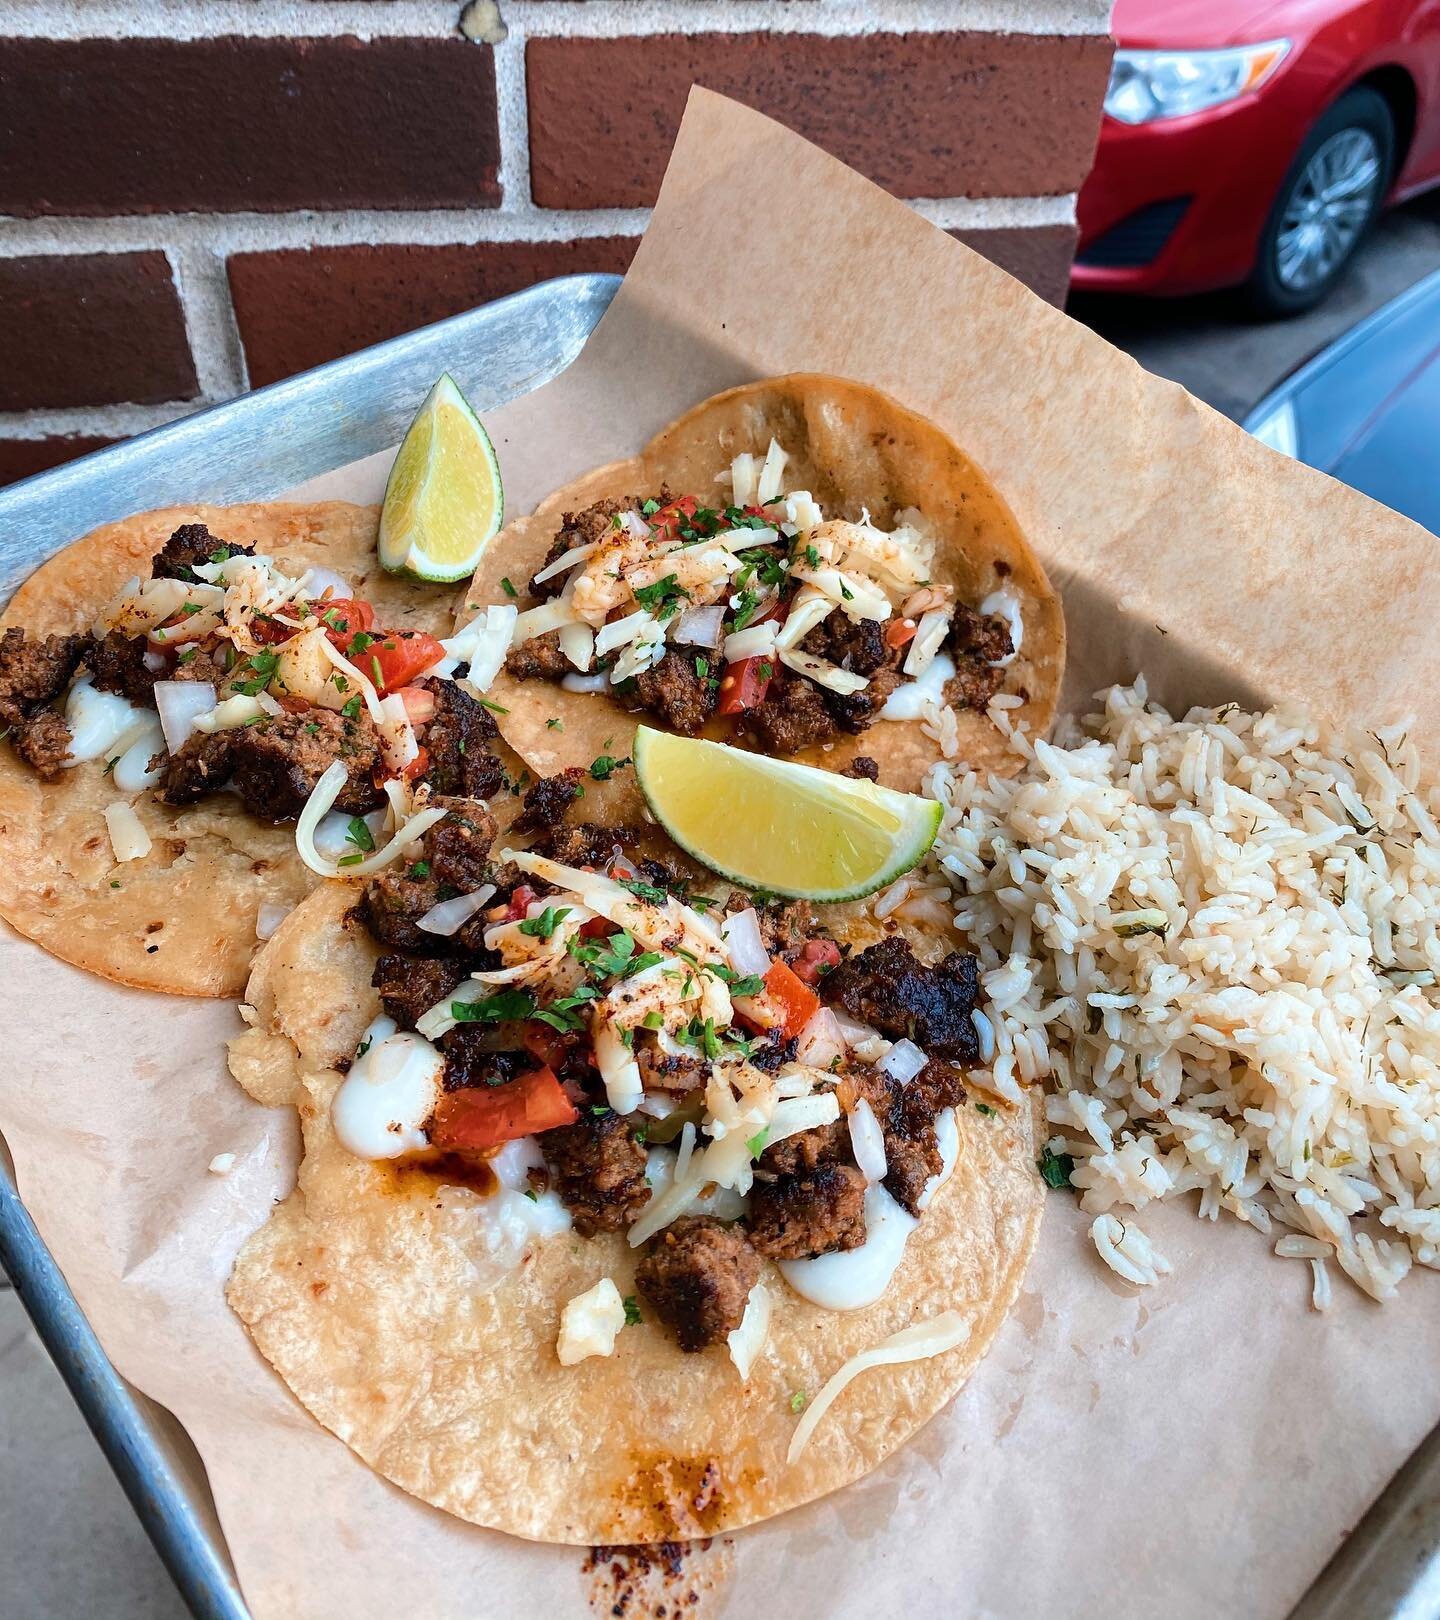 Taco Tuesday Week 3 is comin&rsquo; up people!

We&rsquo;re bringin&rsquo; that MIDEAST FLAIR 🔥 with this one.

Fresh Lamb Kebob hot off a wide iron skewer 🔥🔥🔥

Topped with whipped garlic sauce, nutty chili salsa, cheddar cheese &amp; more 💥

TU